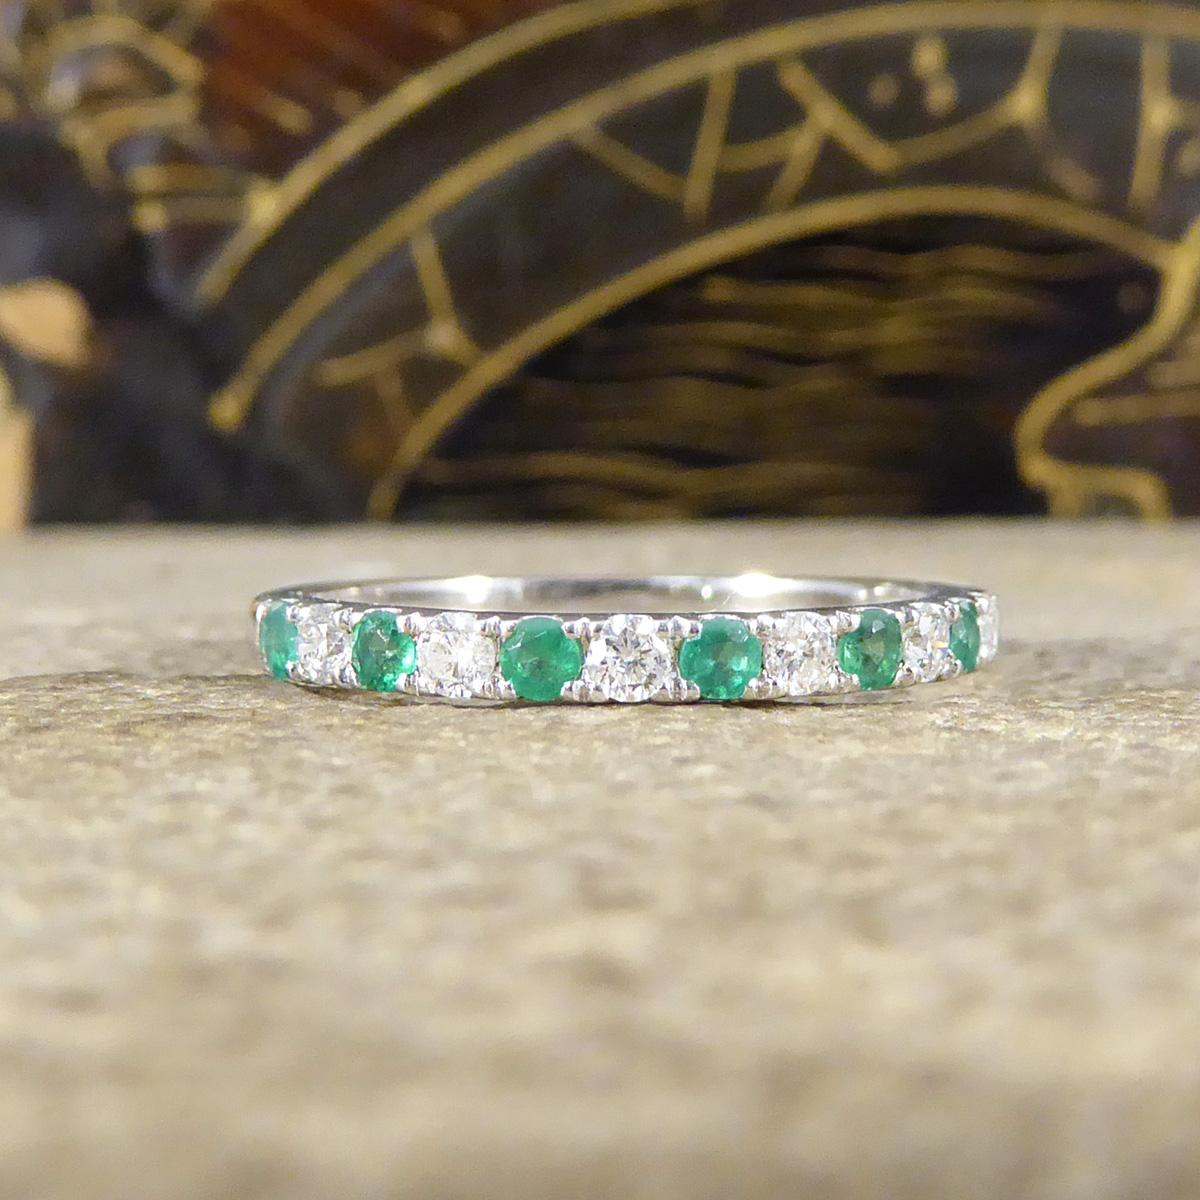 An eternity ring with a difference. This half eternity ring features 7 alternating Emeralds with 6 Diamonds giving it full sparkle across the whole head of the ring. All the stones round cuts in claw settings in 9ct White Gold to compliment them.